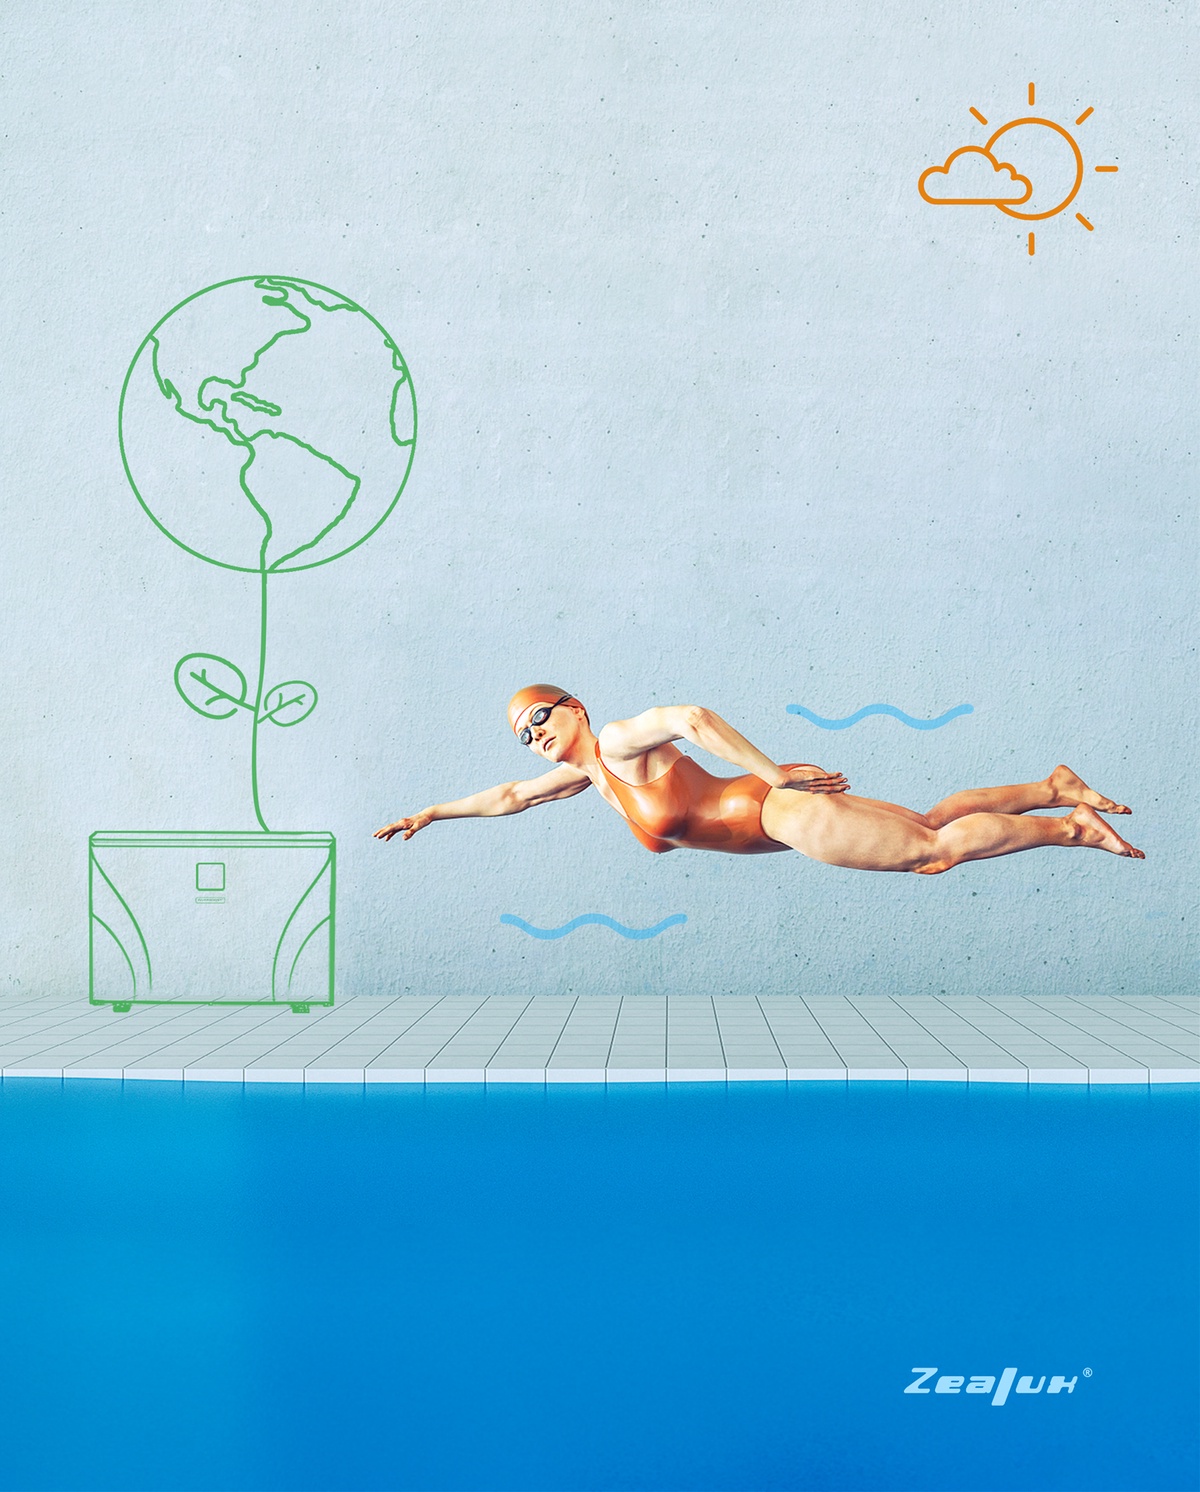 Why Professional Installation Matters for Pool Heat Pumps: Ensuring Optimal Performance